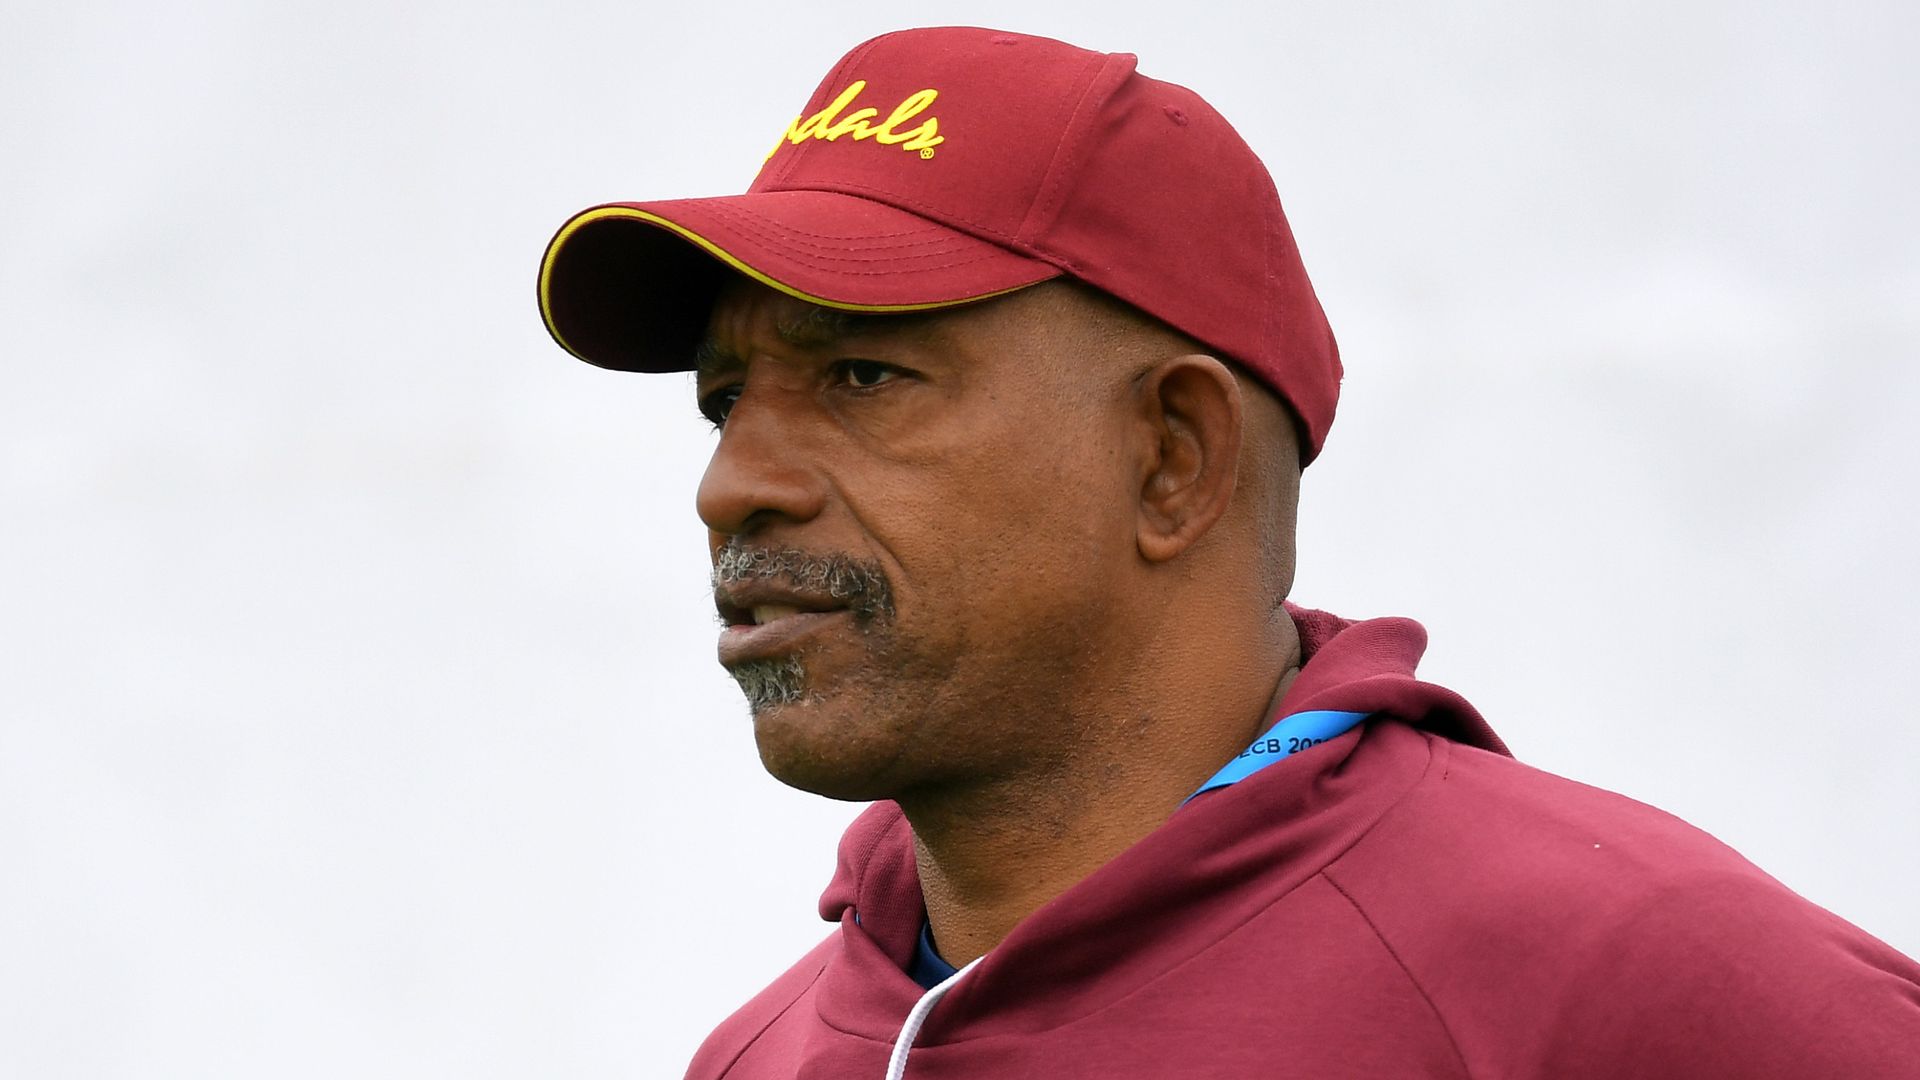 Simmons stepping down as Windies coach